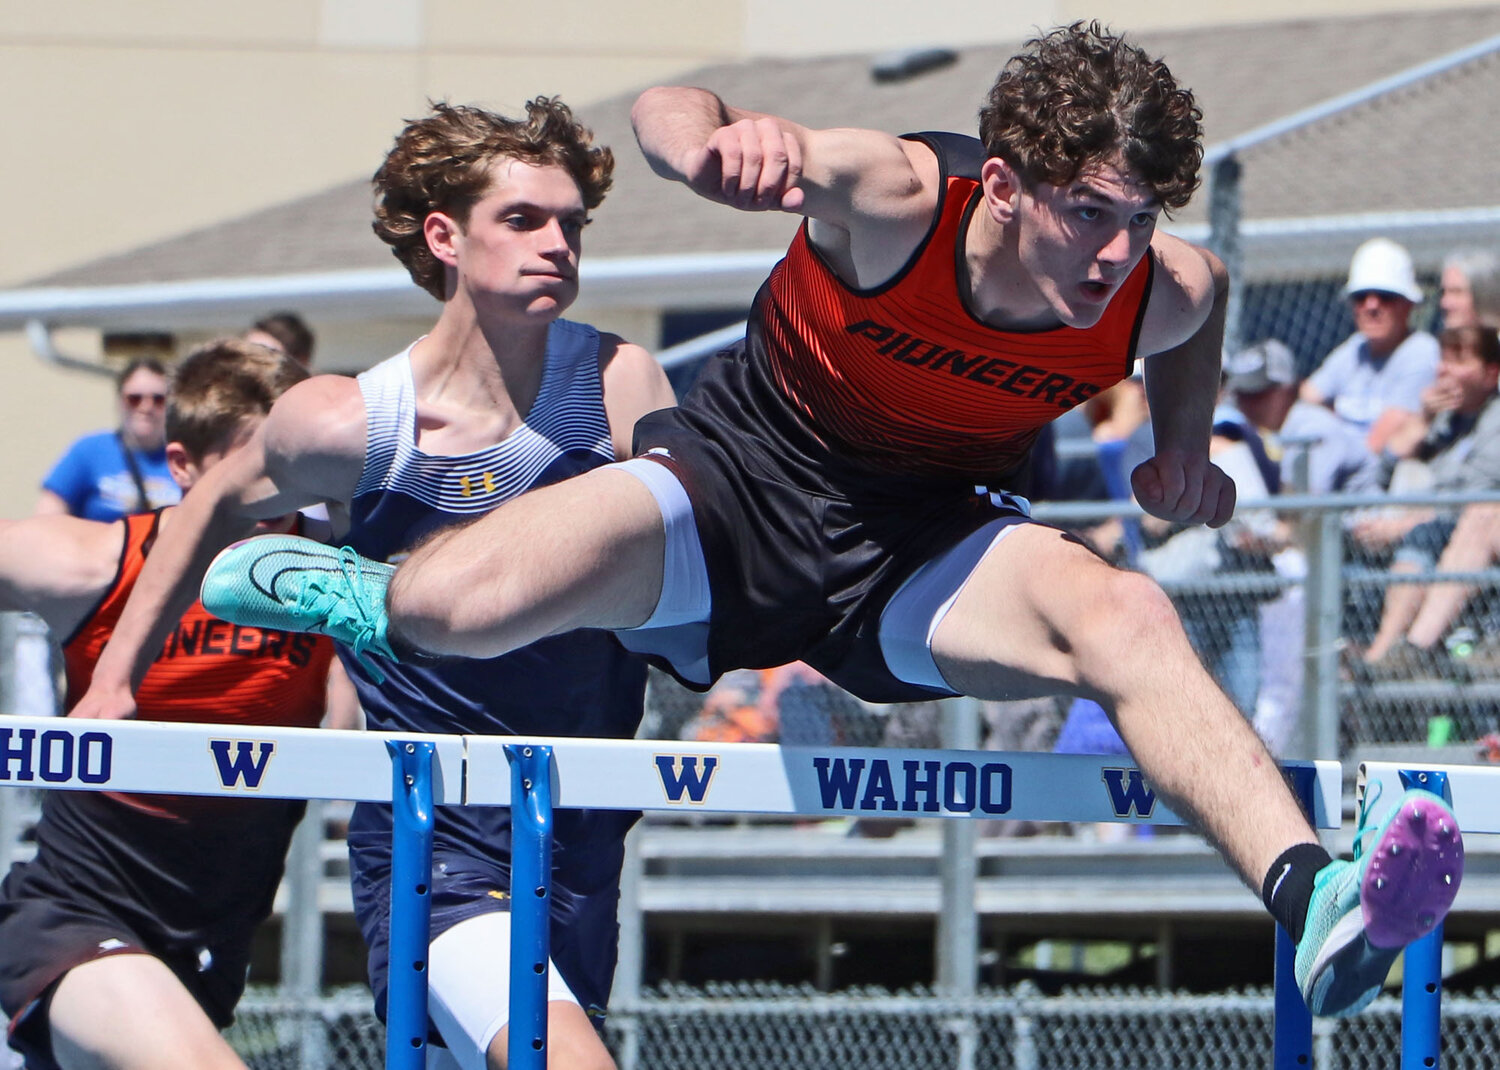 Matthew Kelly of Fort Calhoun clears a hurdle Friday at Wahoo High School. Arlington, Blair and the Pioneers all competed there during the Warriors' home meet.